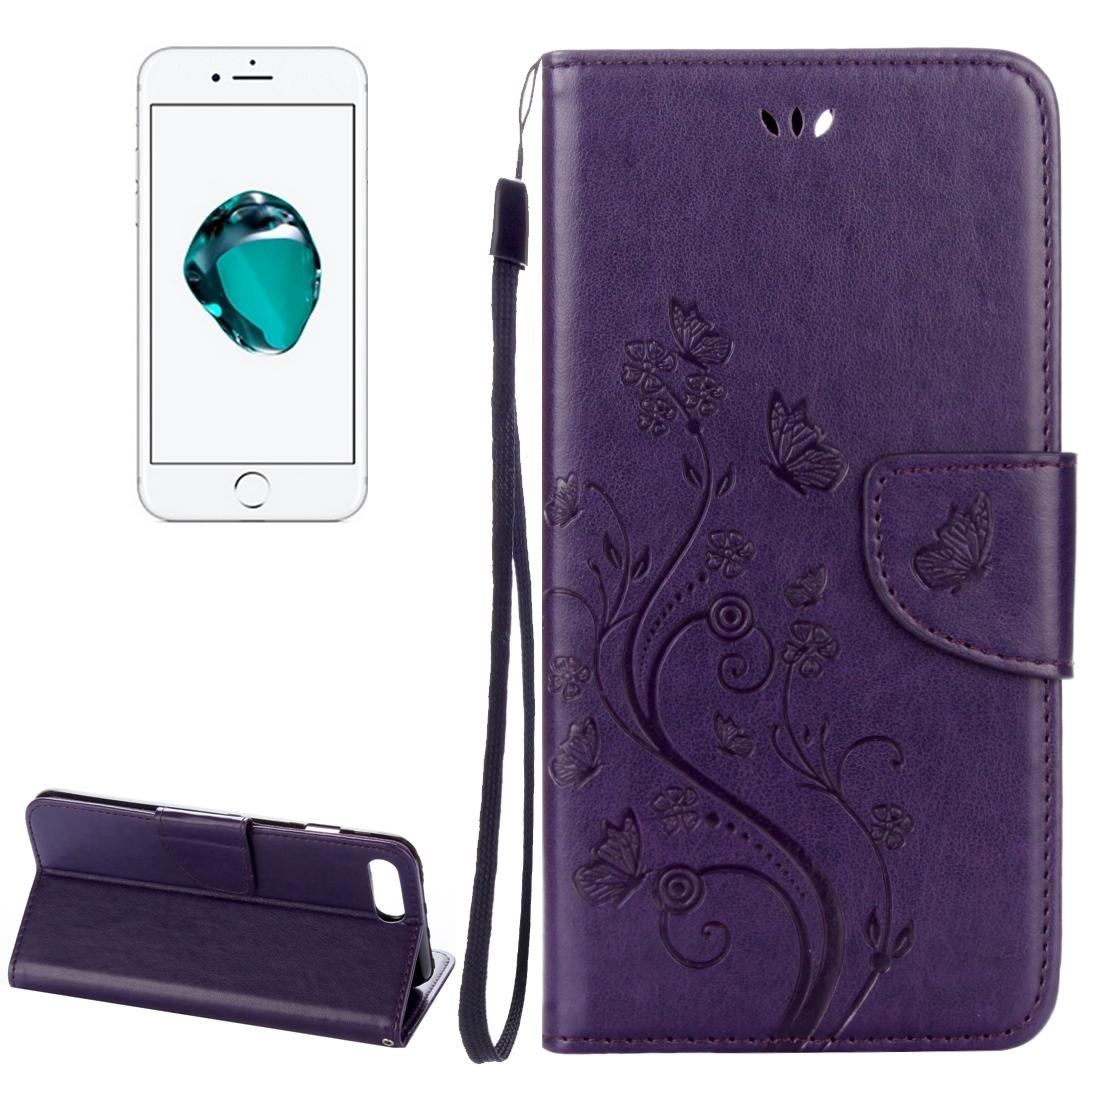 For iPhone 8 PLUS,7 PLUS Wallet Case,Butterflies Emboss Leather Cover,Purple